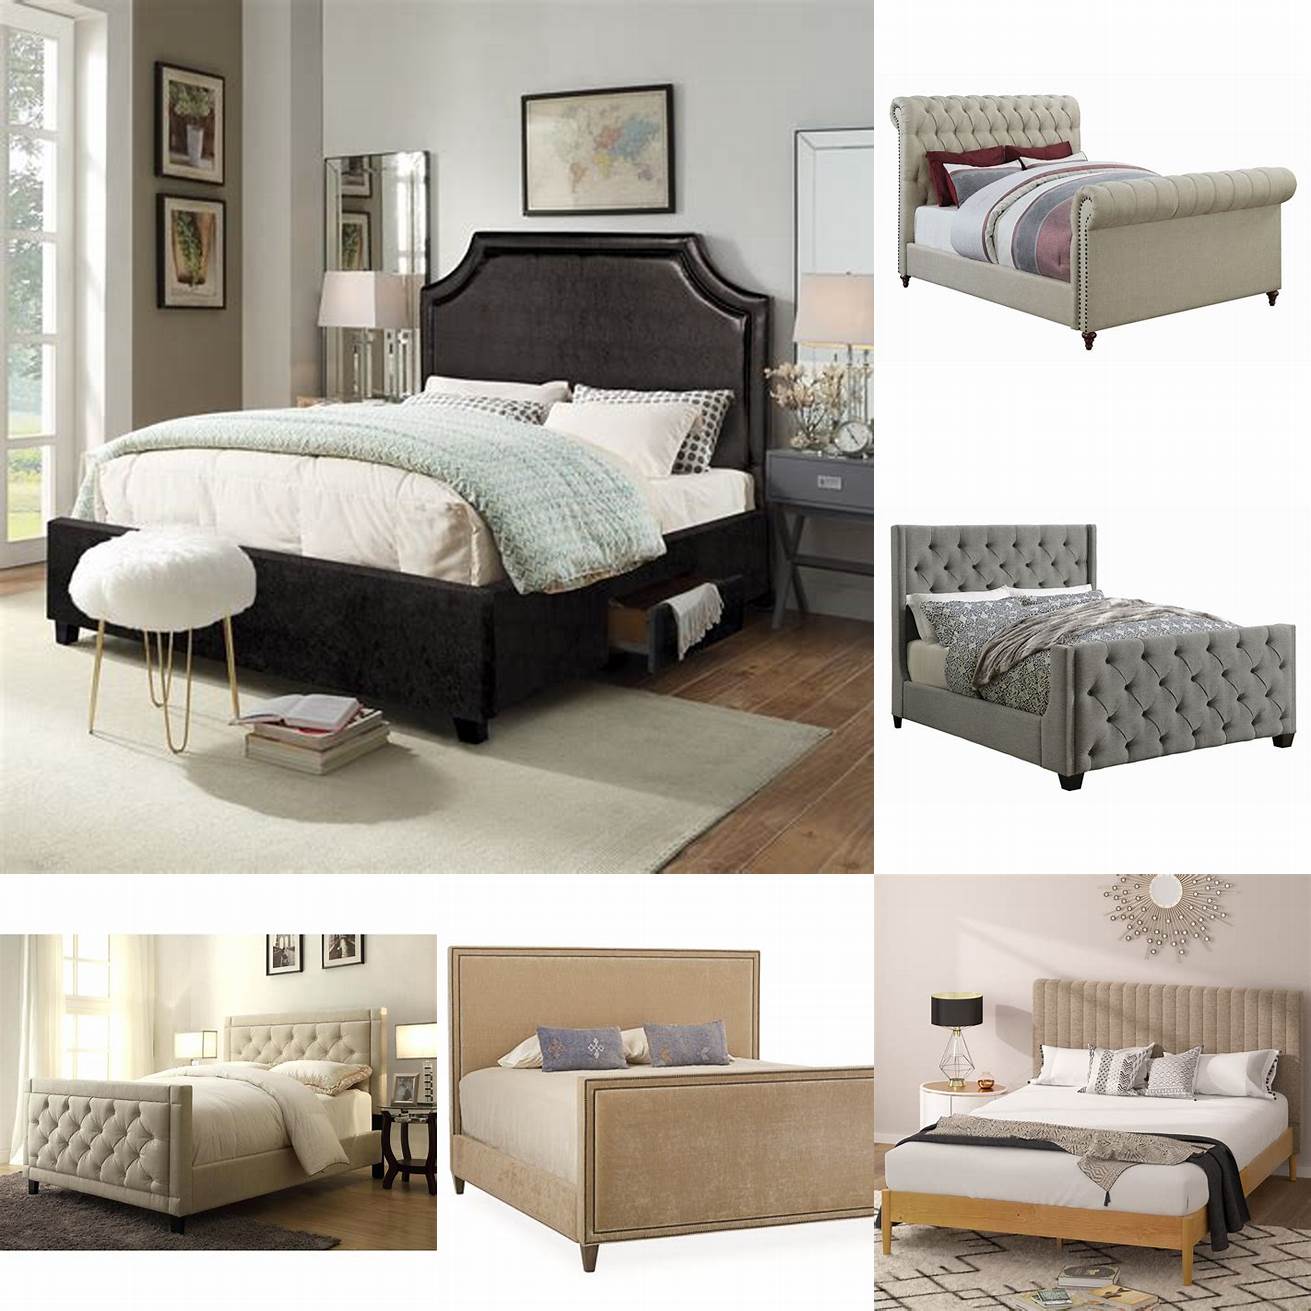 Upholstered Eastern King Bed - a bed with a padded headboard andor footboard